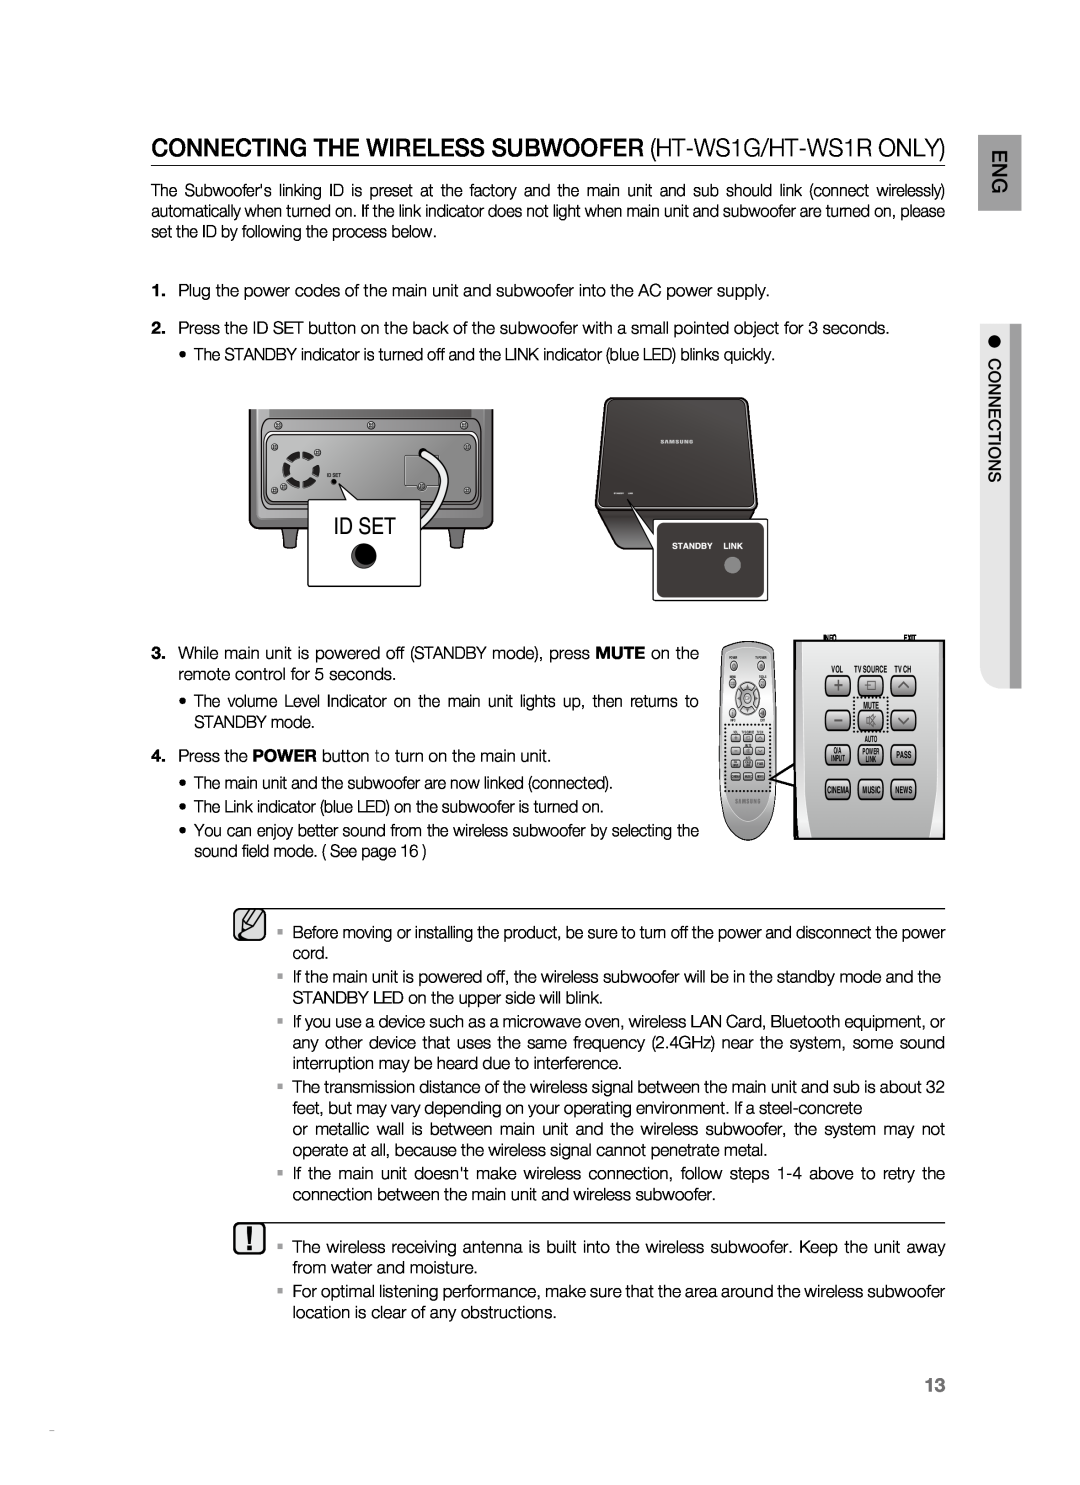 Samsung HT-SB1R, HT-WS1R, HT-SB1G, HT-WS1G user manual connections 